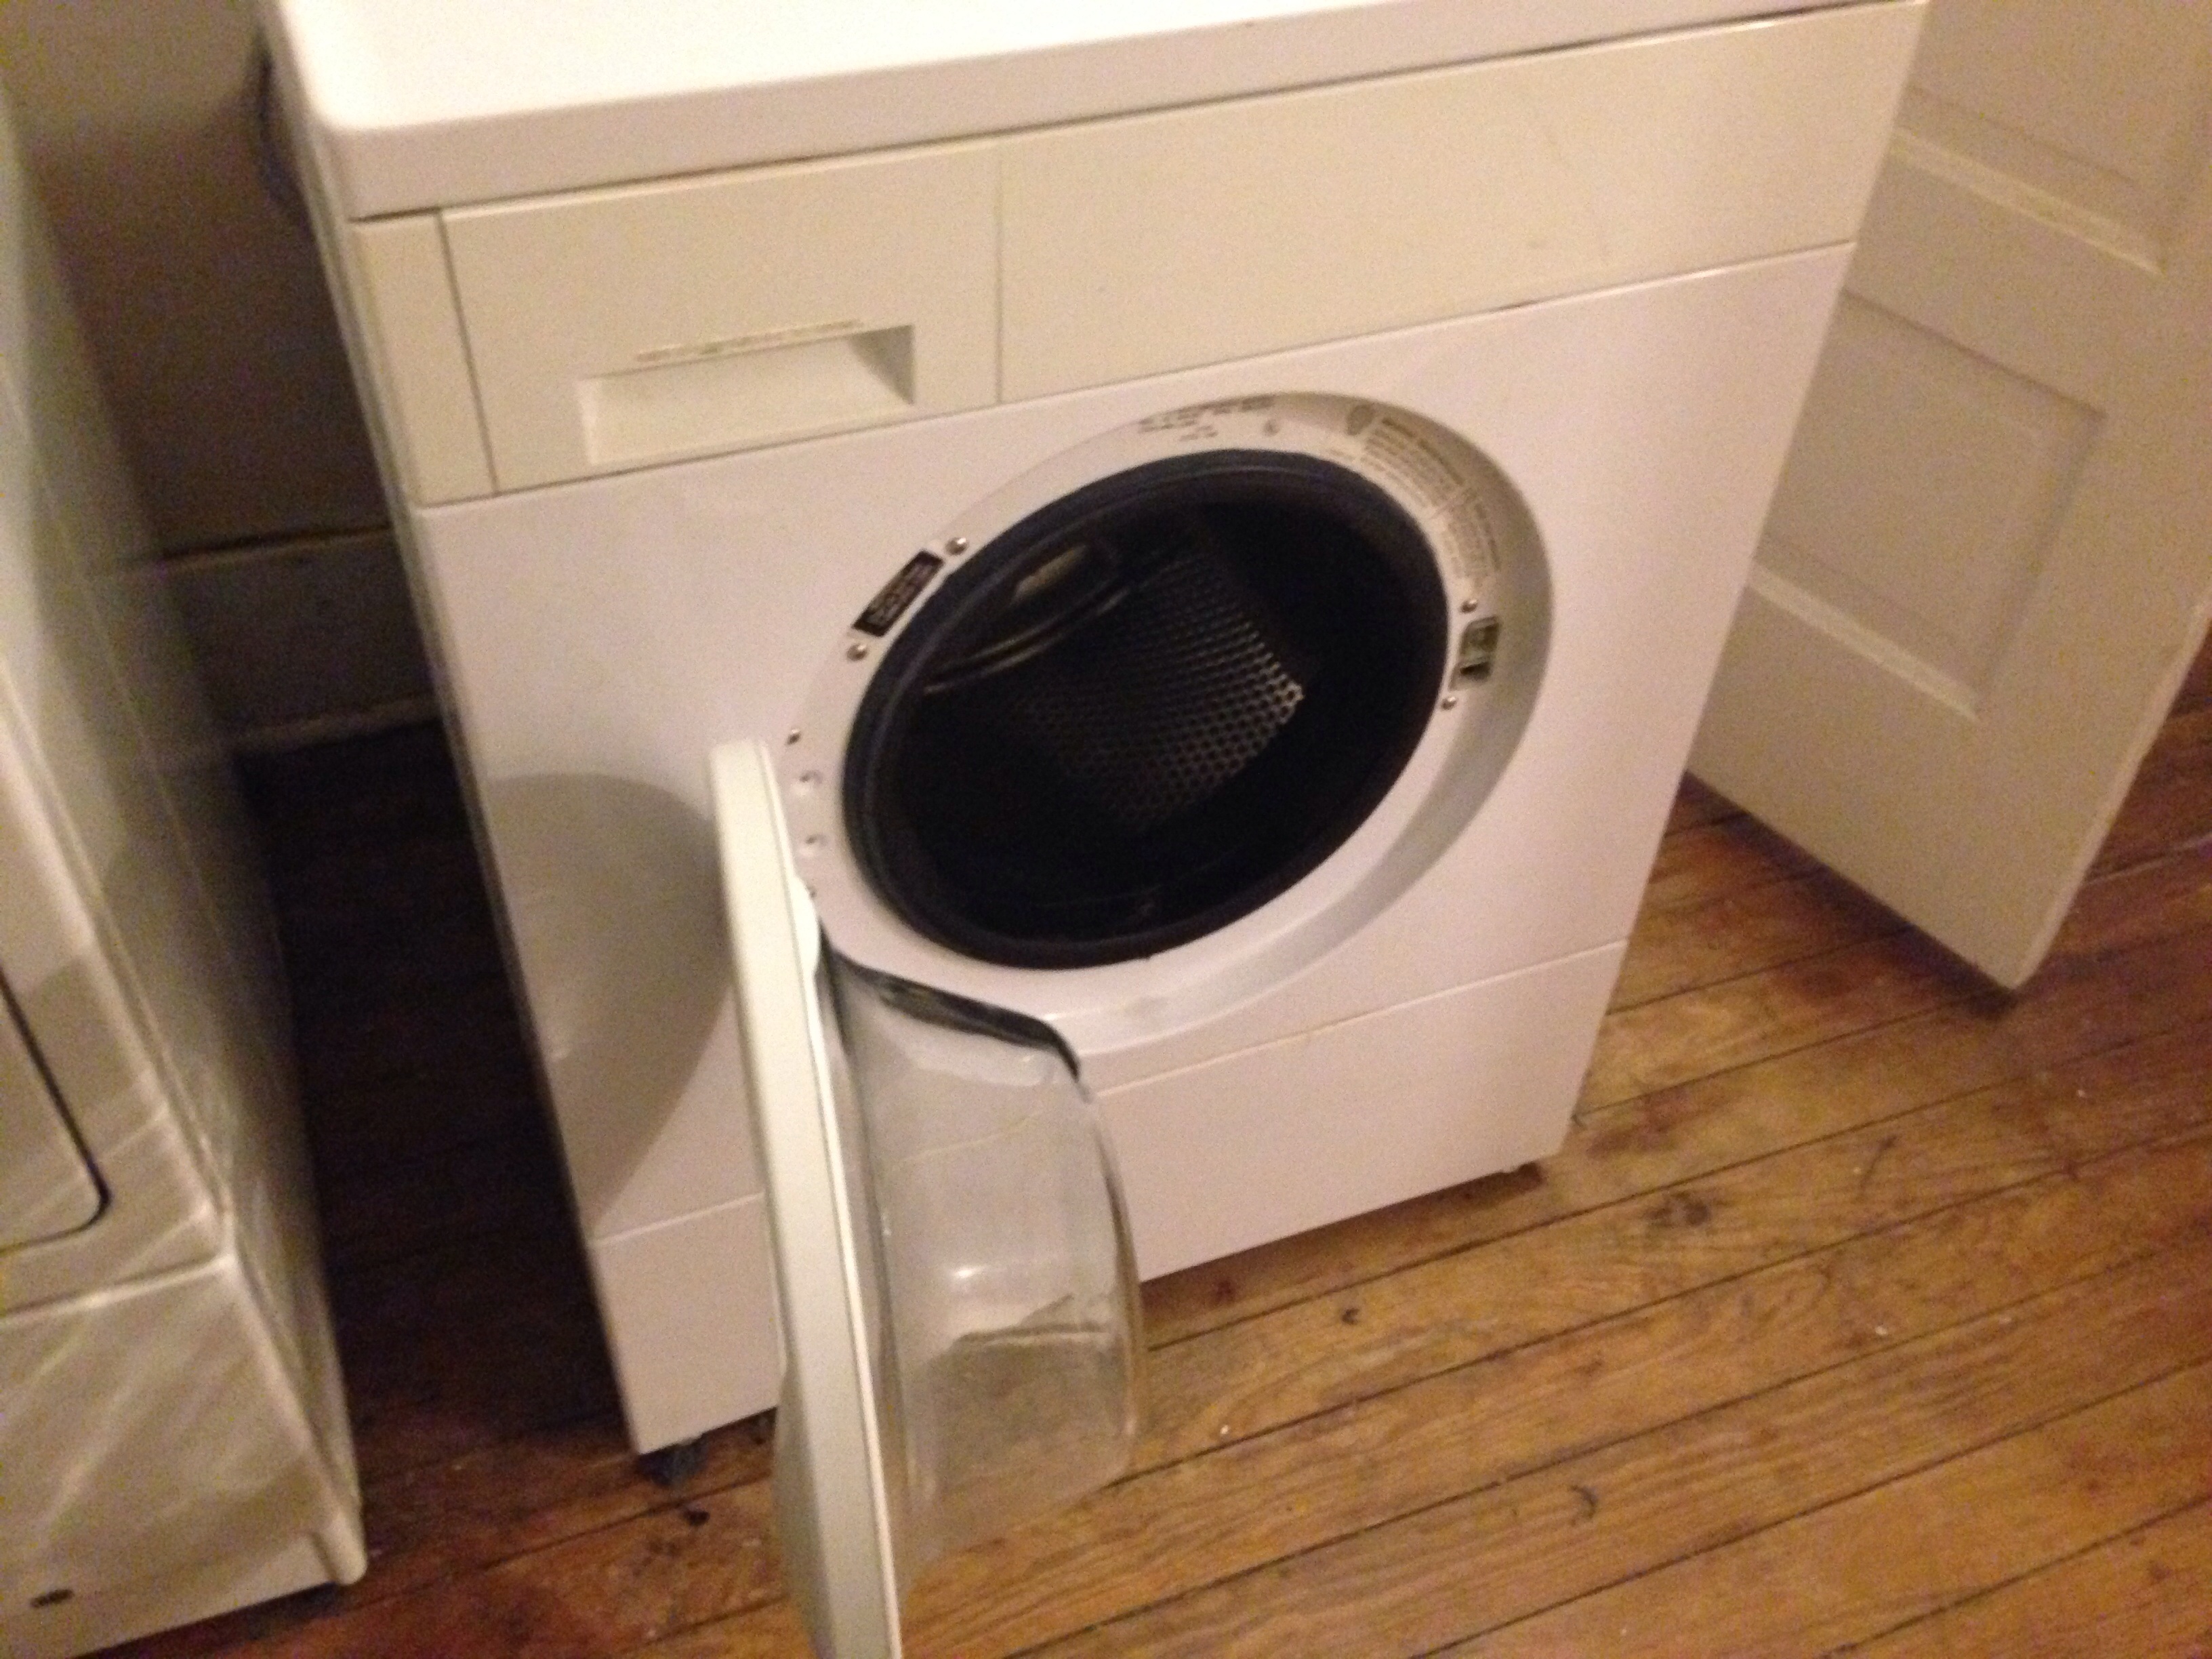 I have a Kenmore front loading washer and dry